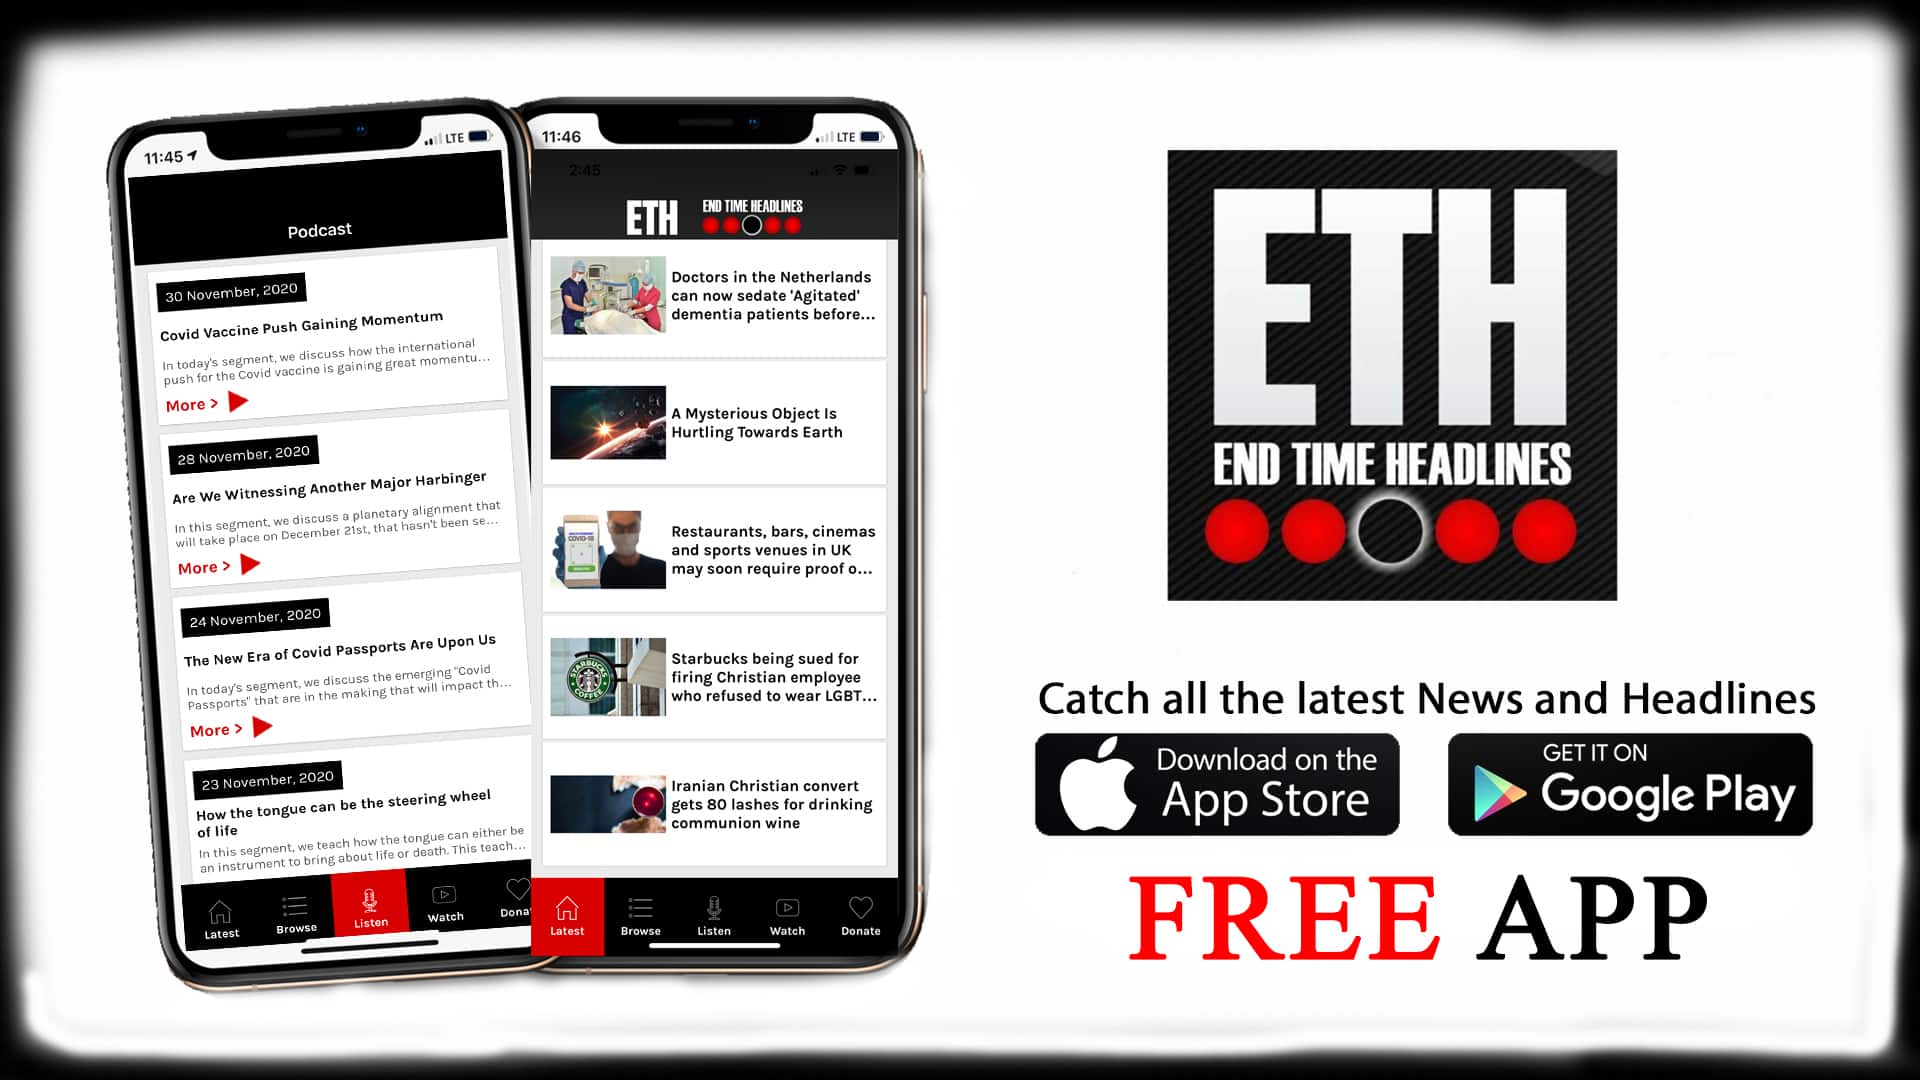 Download our FREE App today to catch every headline and podcast